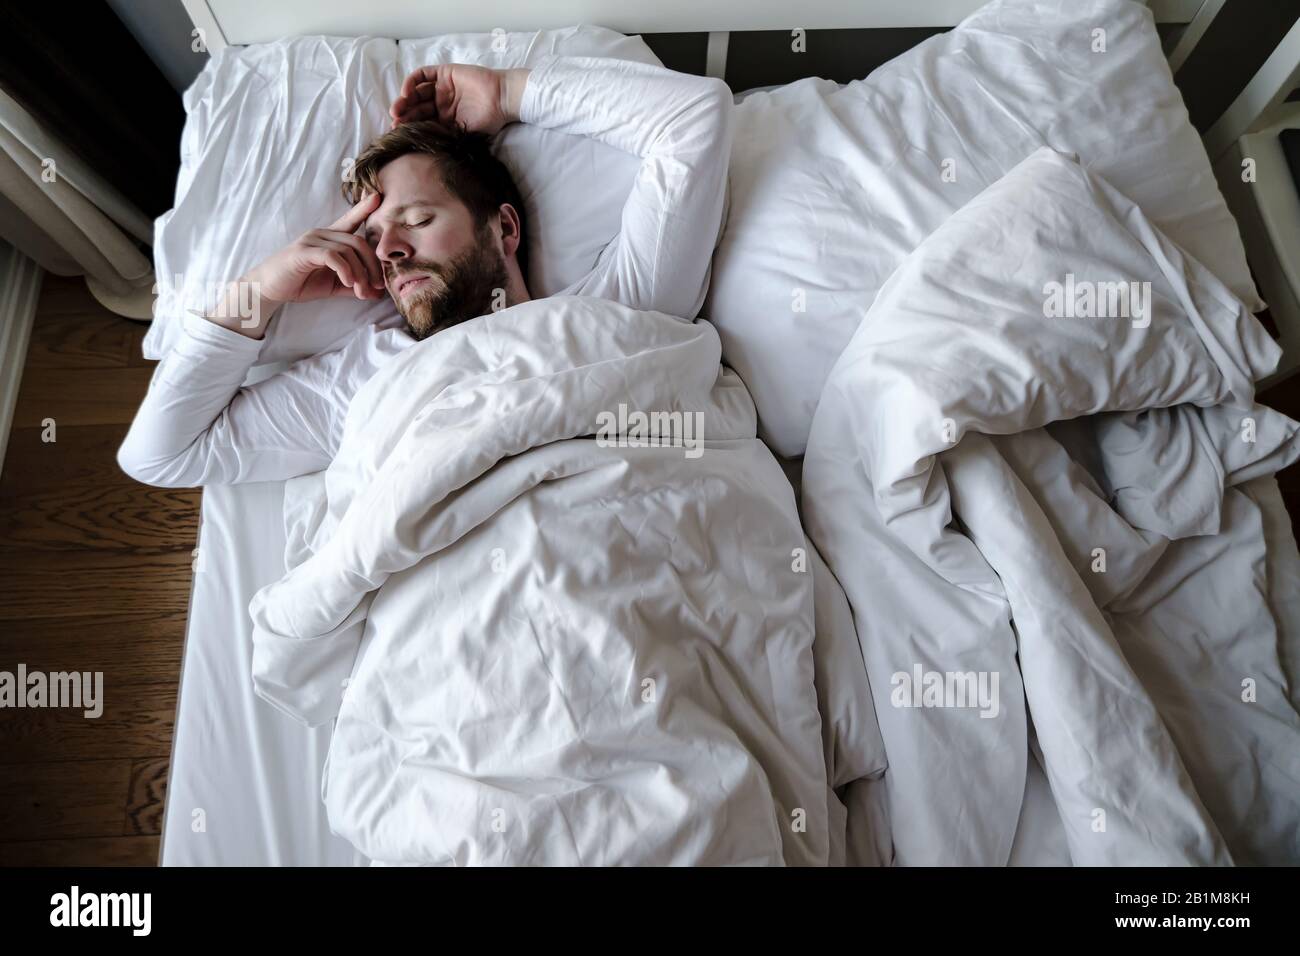 Bearded Man Sleeps Restlessly In Bed He Is Alarmed And Had A